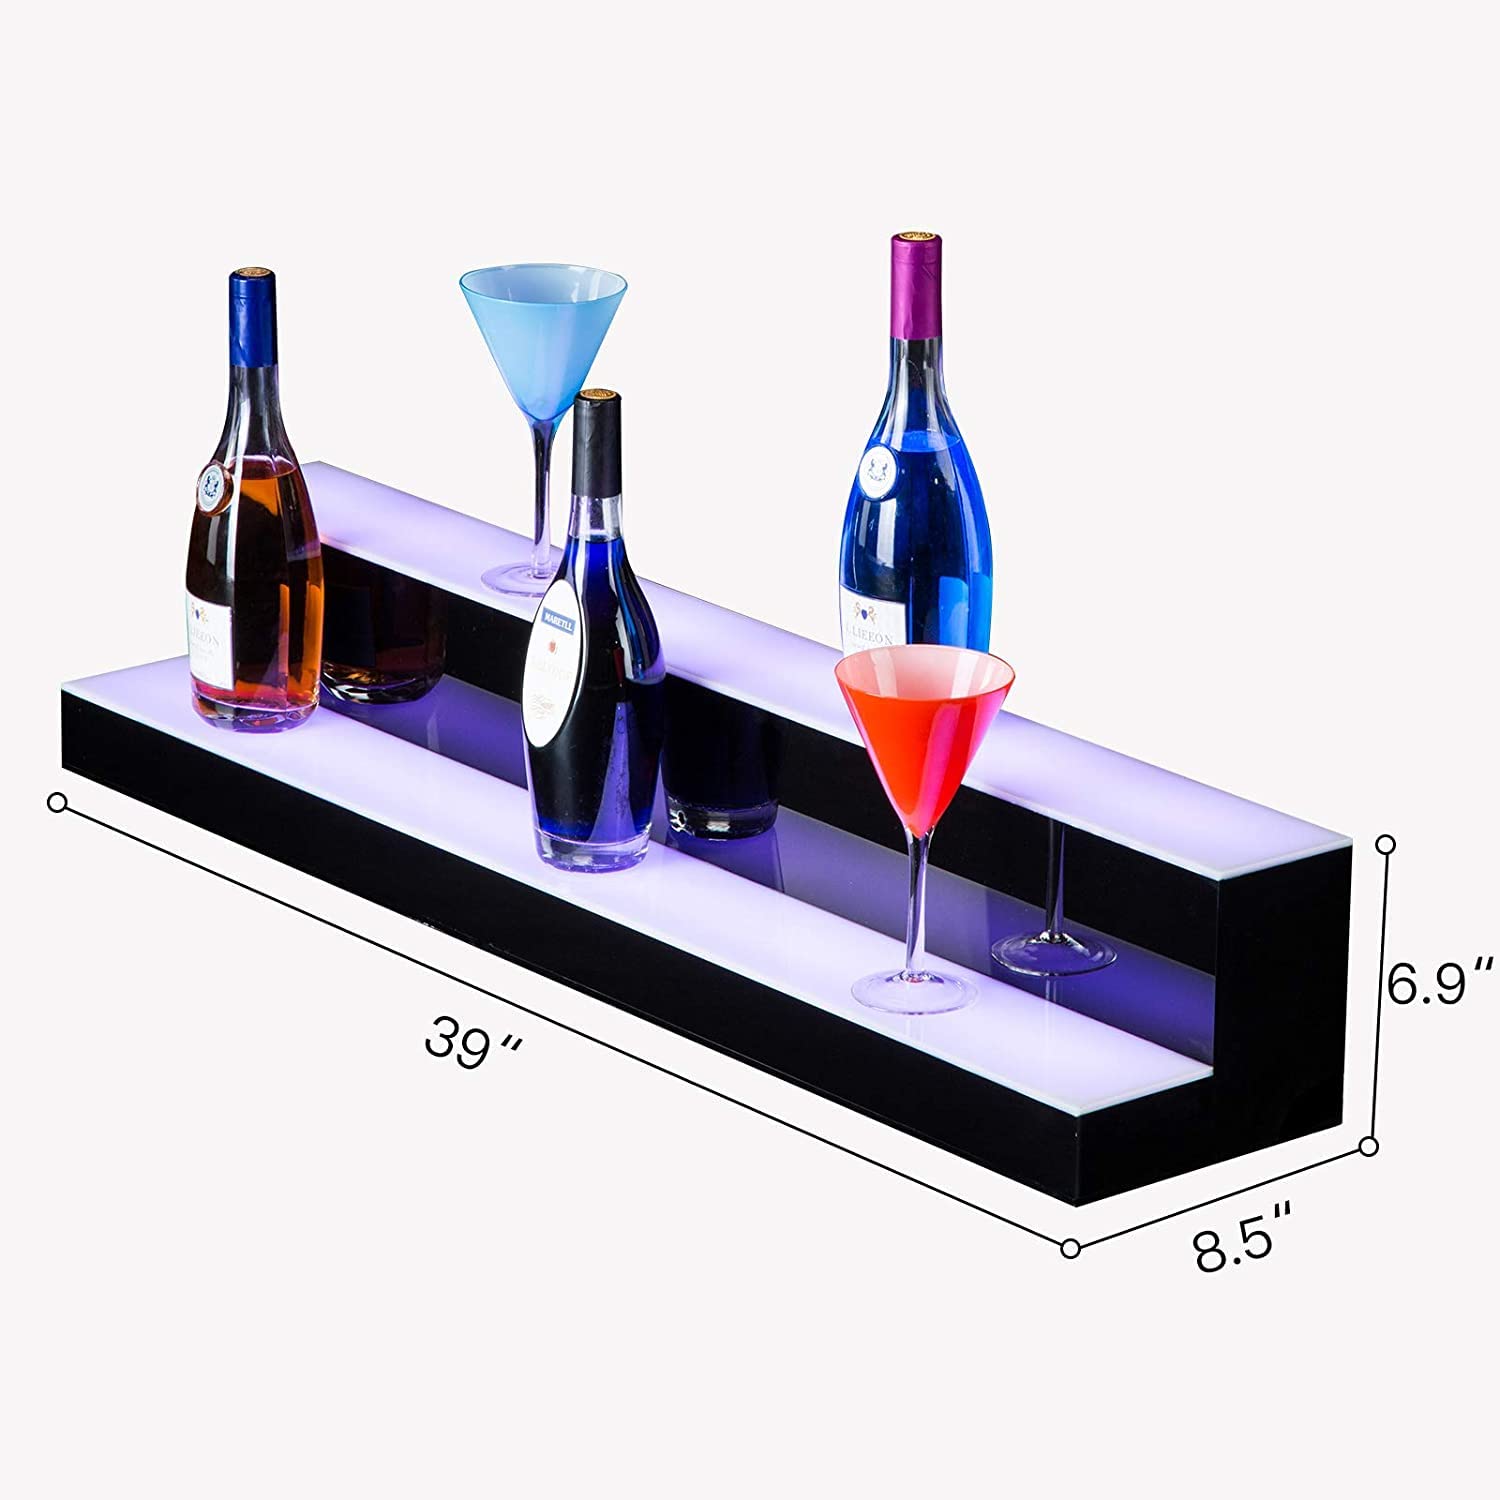 Alohappy LED Lighted Liquor Bottle Display Shelf, 40 in 2 Step LED Lighted Bar Shelf for Home Commercial Bar Drinks Acrylic Lighting Shelves High Gloss Black Finish with Remote Control